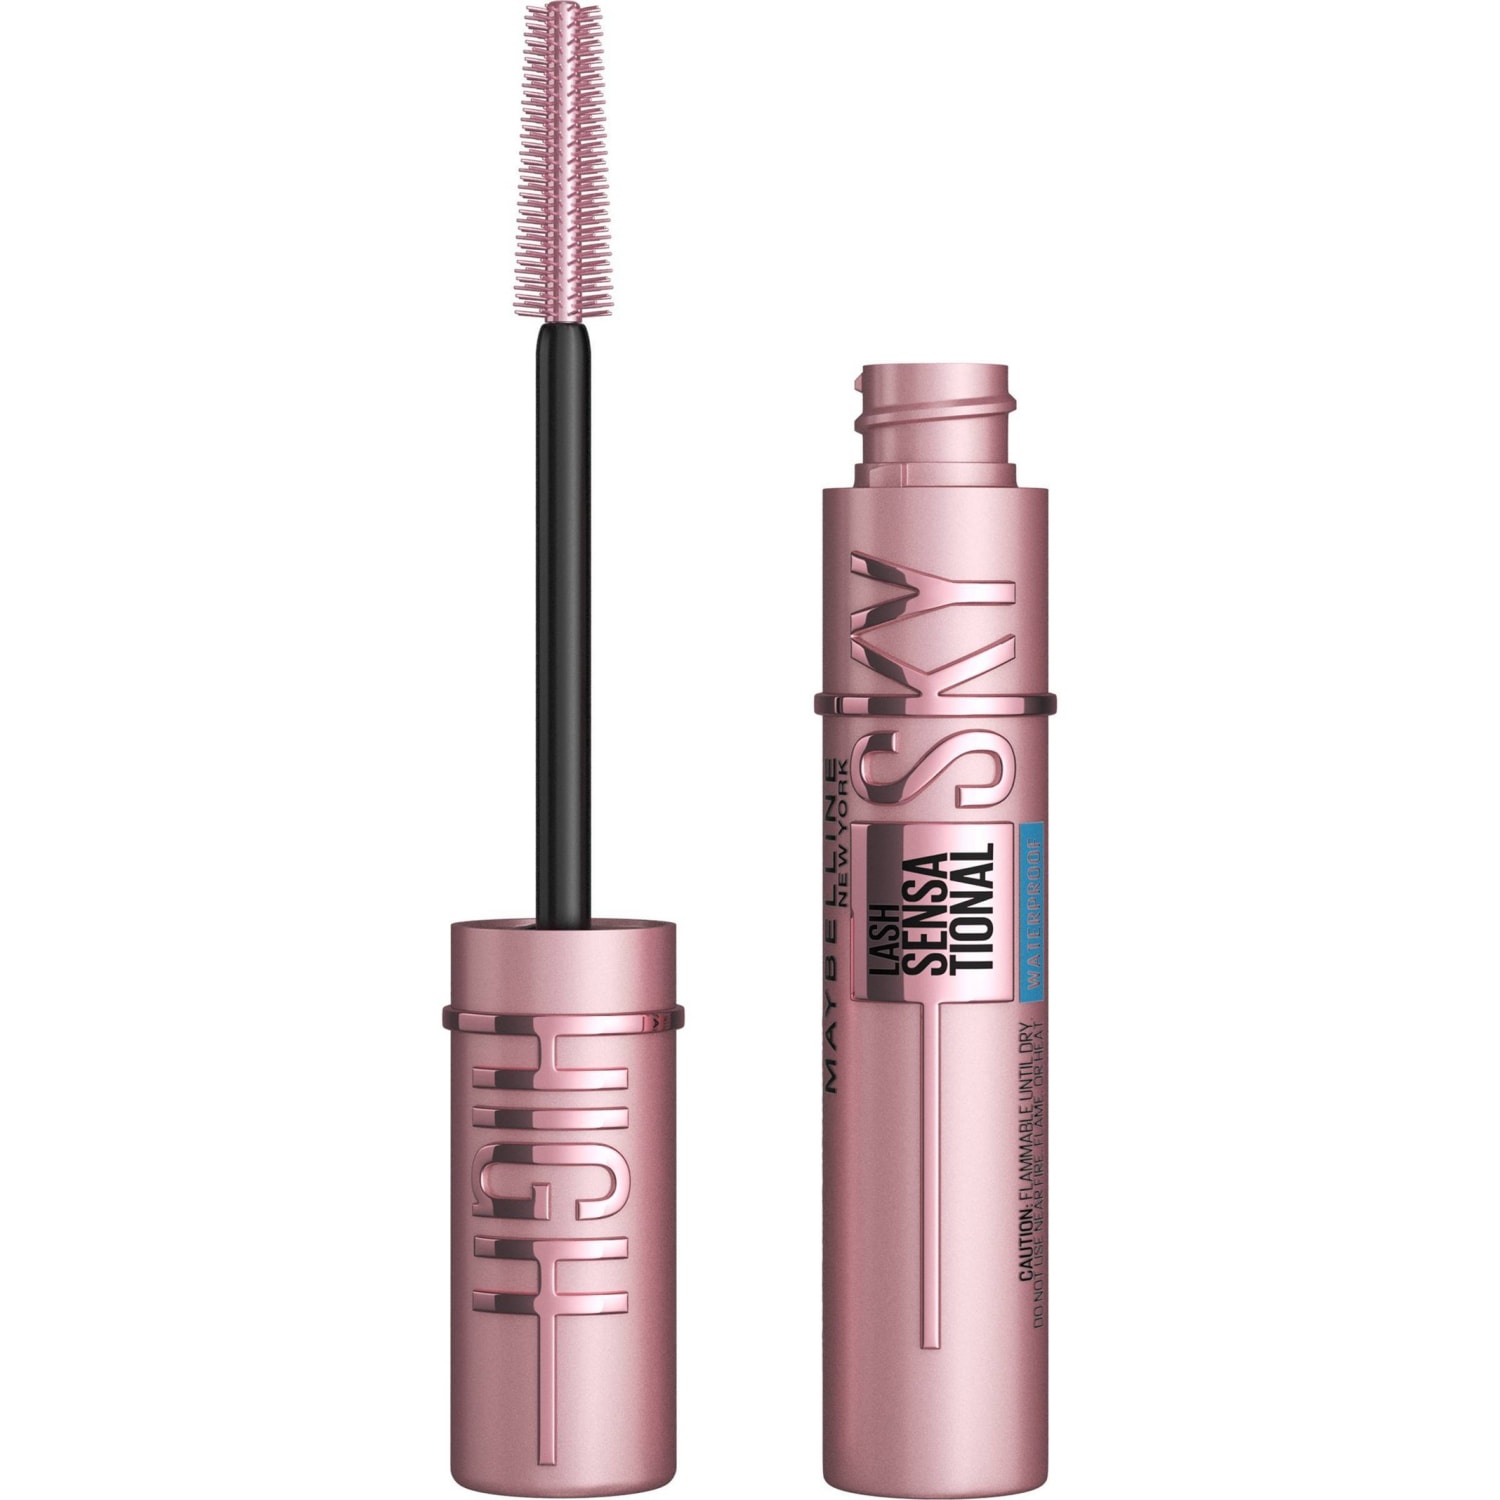 11 waterproof mascaras for smudge-proof - TODAY